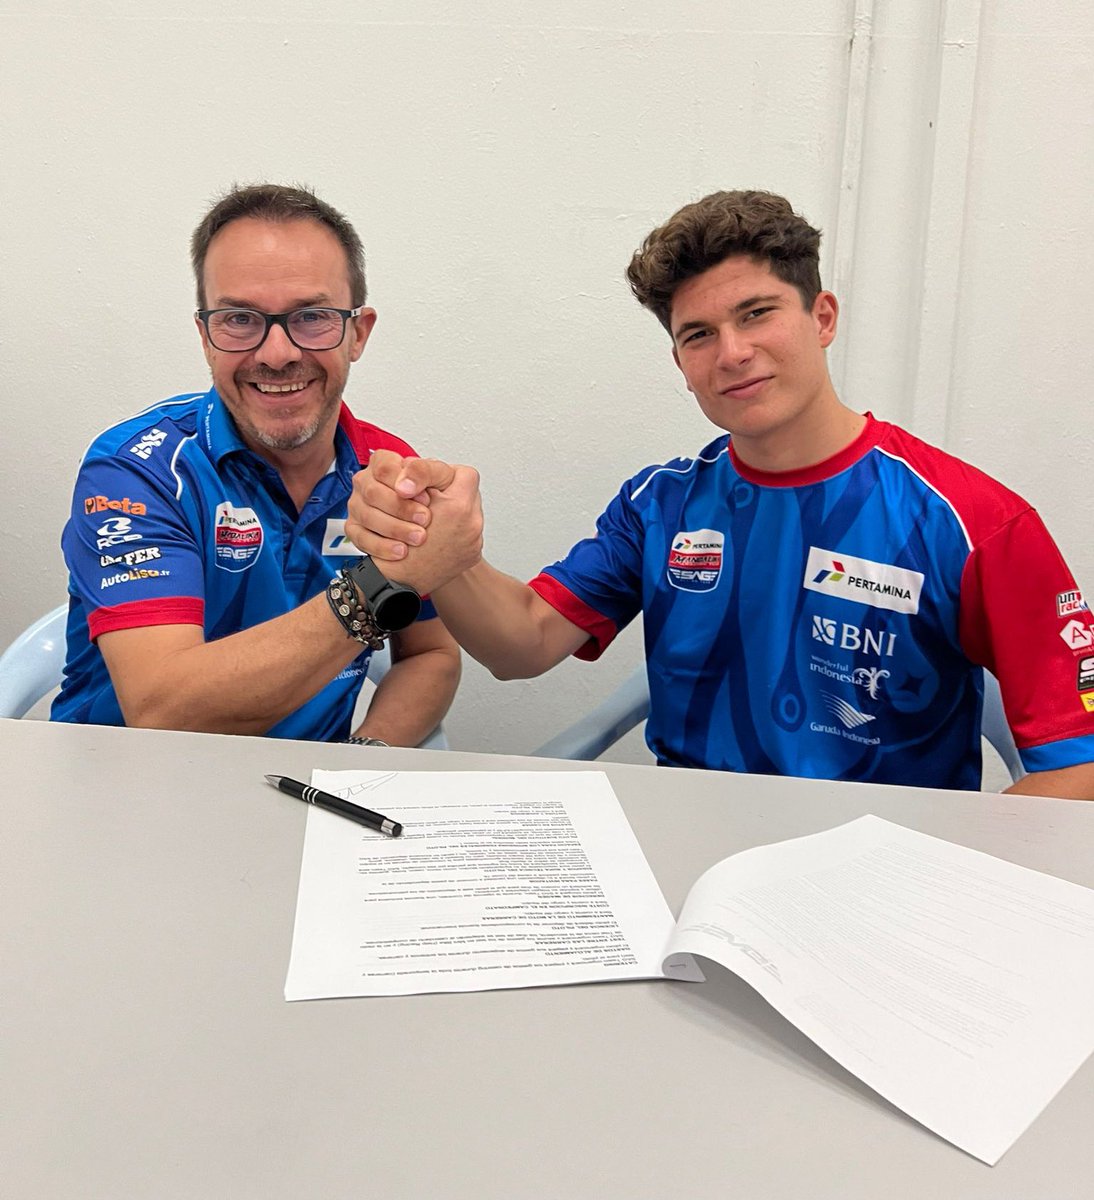 The Pertamina Mandalika SAG Team announces the signing of Carlos Tatay for next season into the Moto2 structure in the Junior GP, European Championship. Welcome Carlos! More information in our Press Release 📝 cutt.ly/kMqIGGR